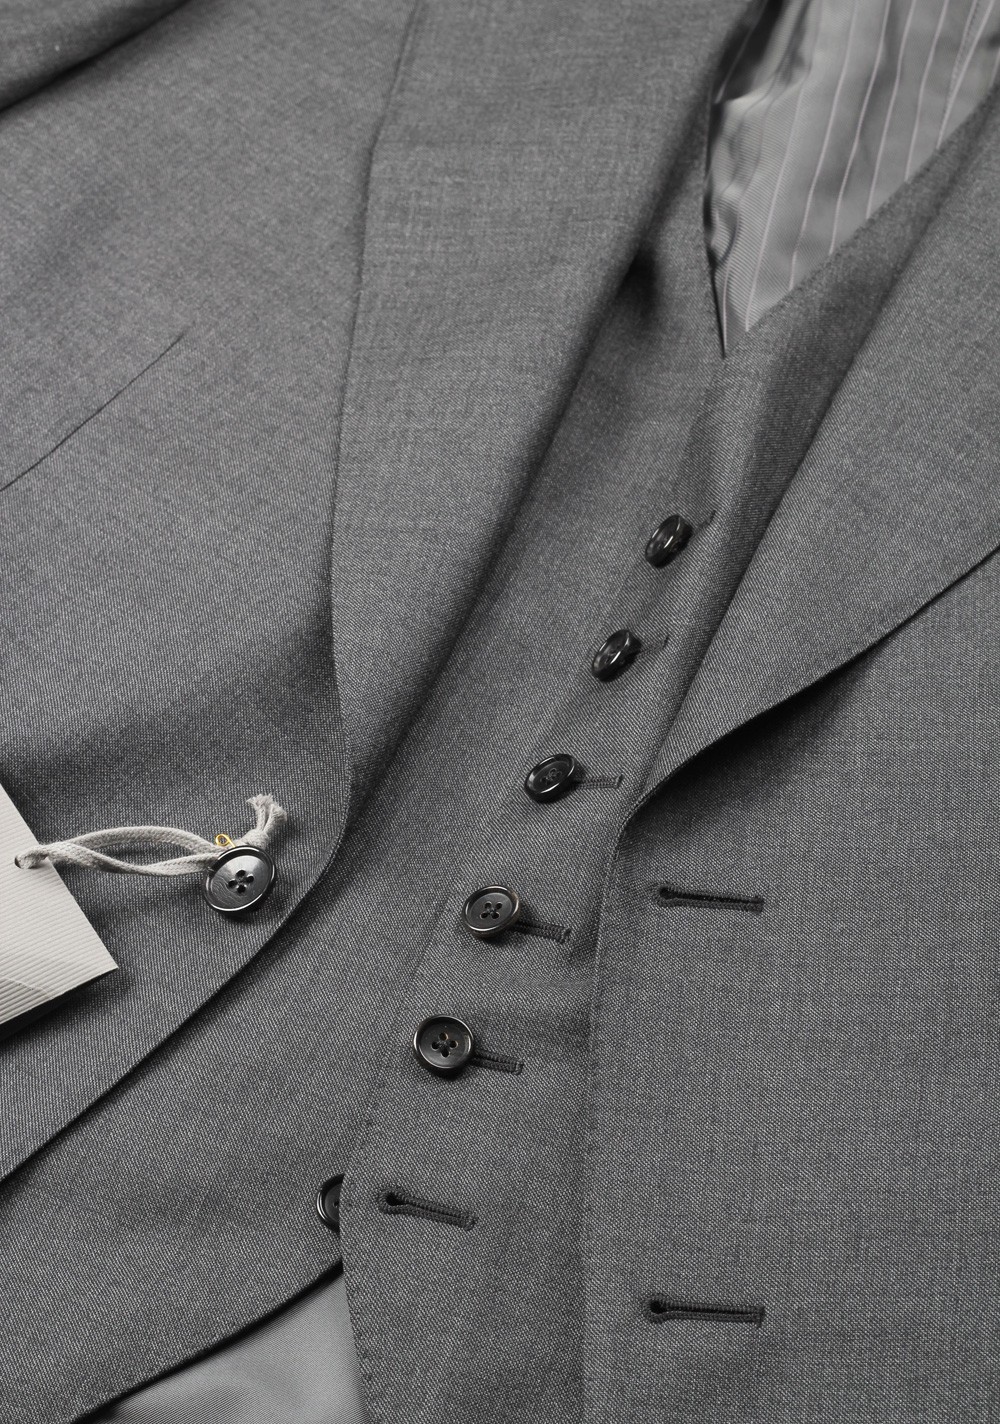 2015 Tom Ford 3 piece suit in gray in multiple sizes | Styleforum